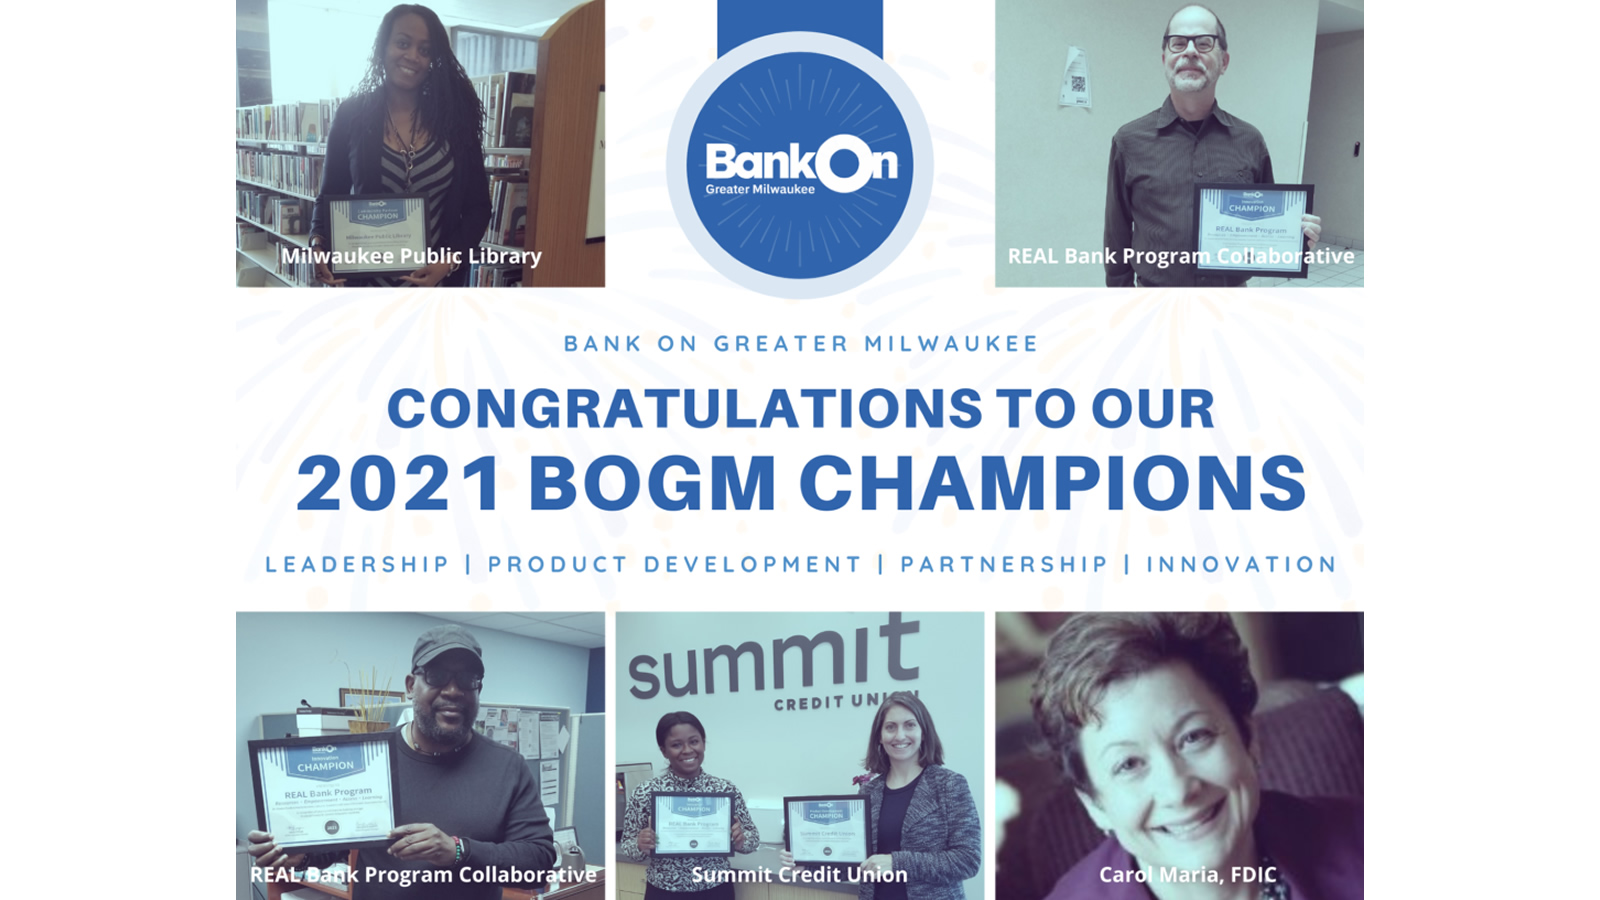 Bank On Greater Milwaukee recognized coalition members who have made a significant contribution to the mission of Bank On Greater Milwaukee over the past year through innovative product development, programming, and community engagement efforts with their 2021 BOGM Champion Awards.